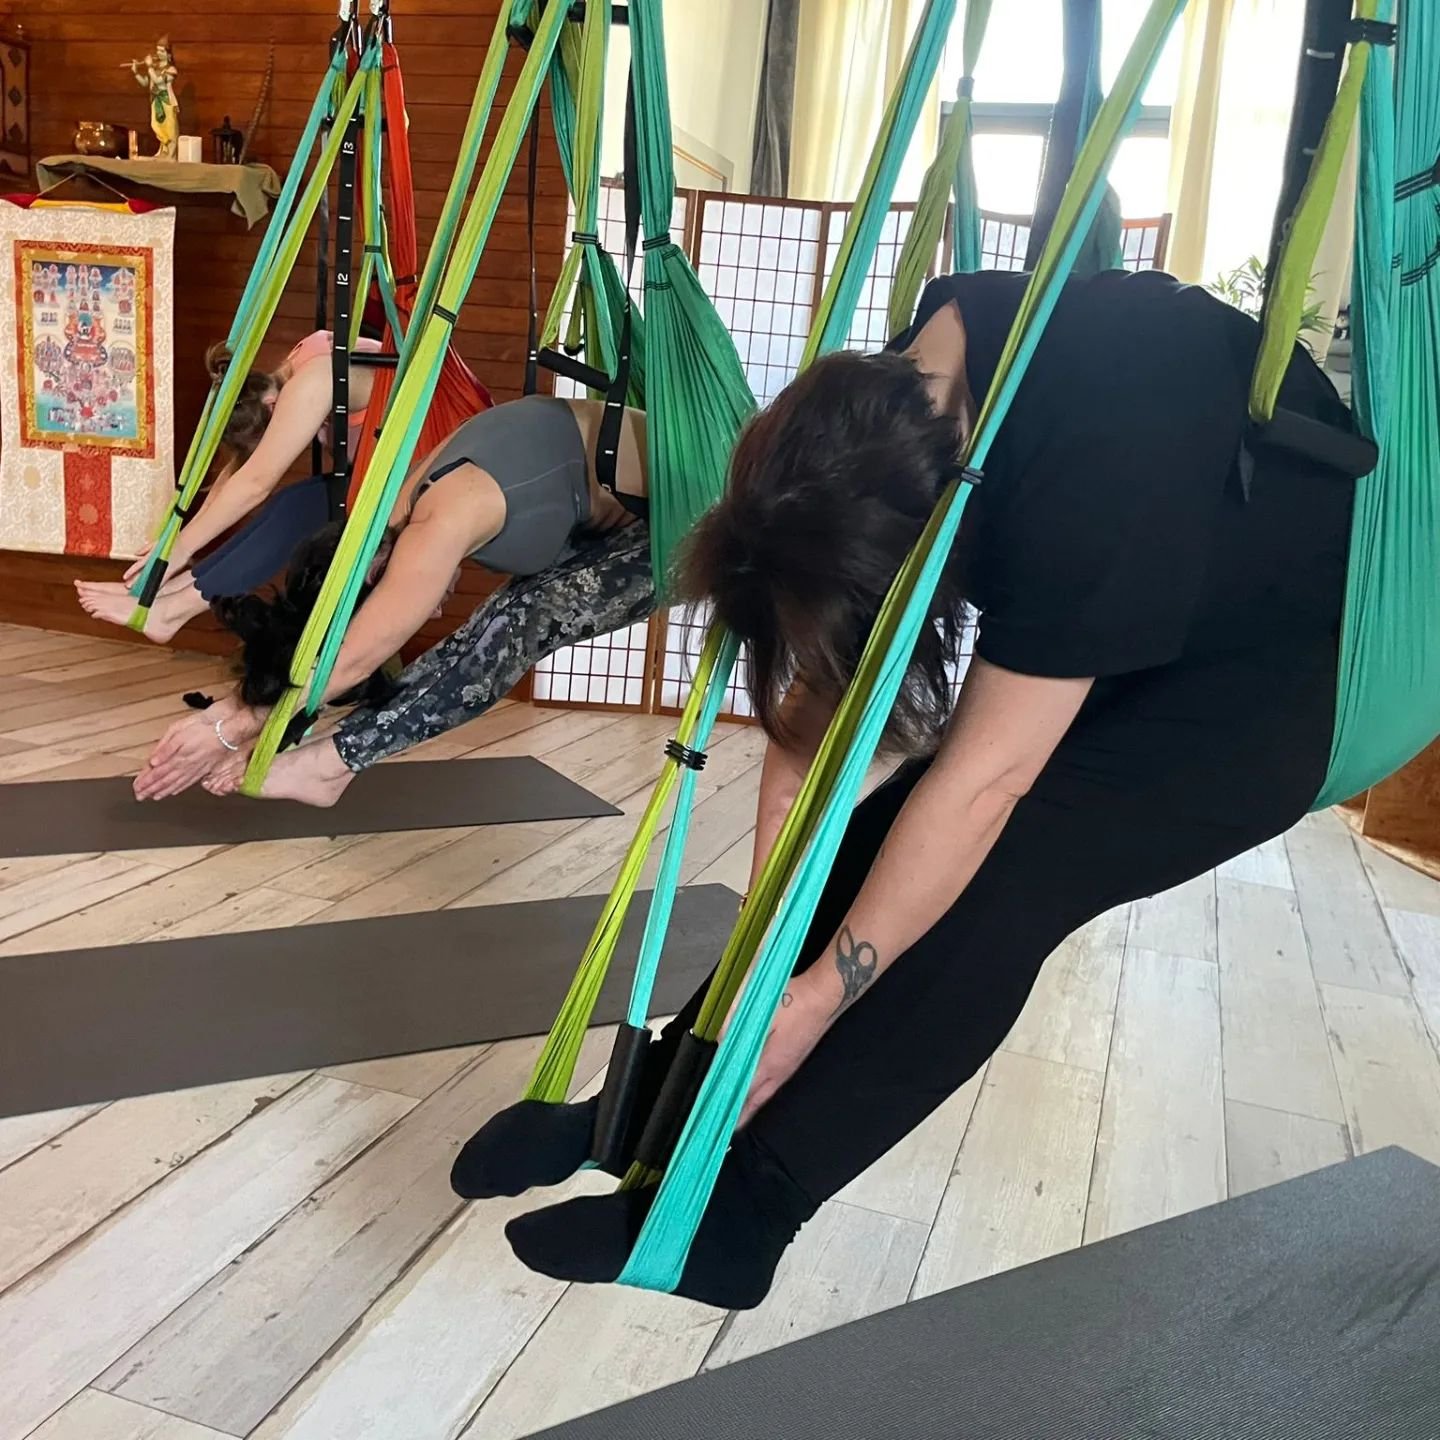 Aerial Yoga.  If you haven't tried it we highly recommend! Find it at the fantastic @theyogafactory_ in Southend

Great day with jmgyoga and @behere_yoga

#aerialyoga
#southendyoga
#chelmsfordyoga
#chelmsfordyogateachers
#southendyogateachers
#yogaco